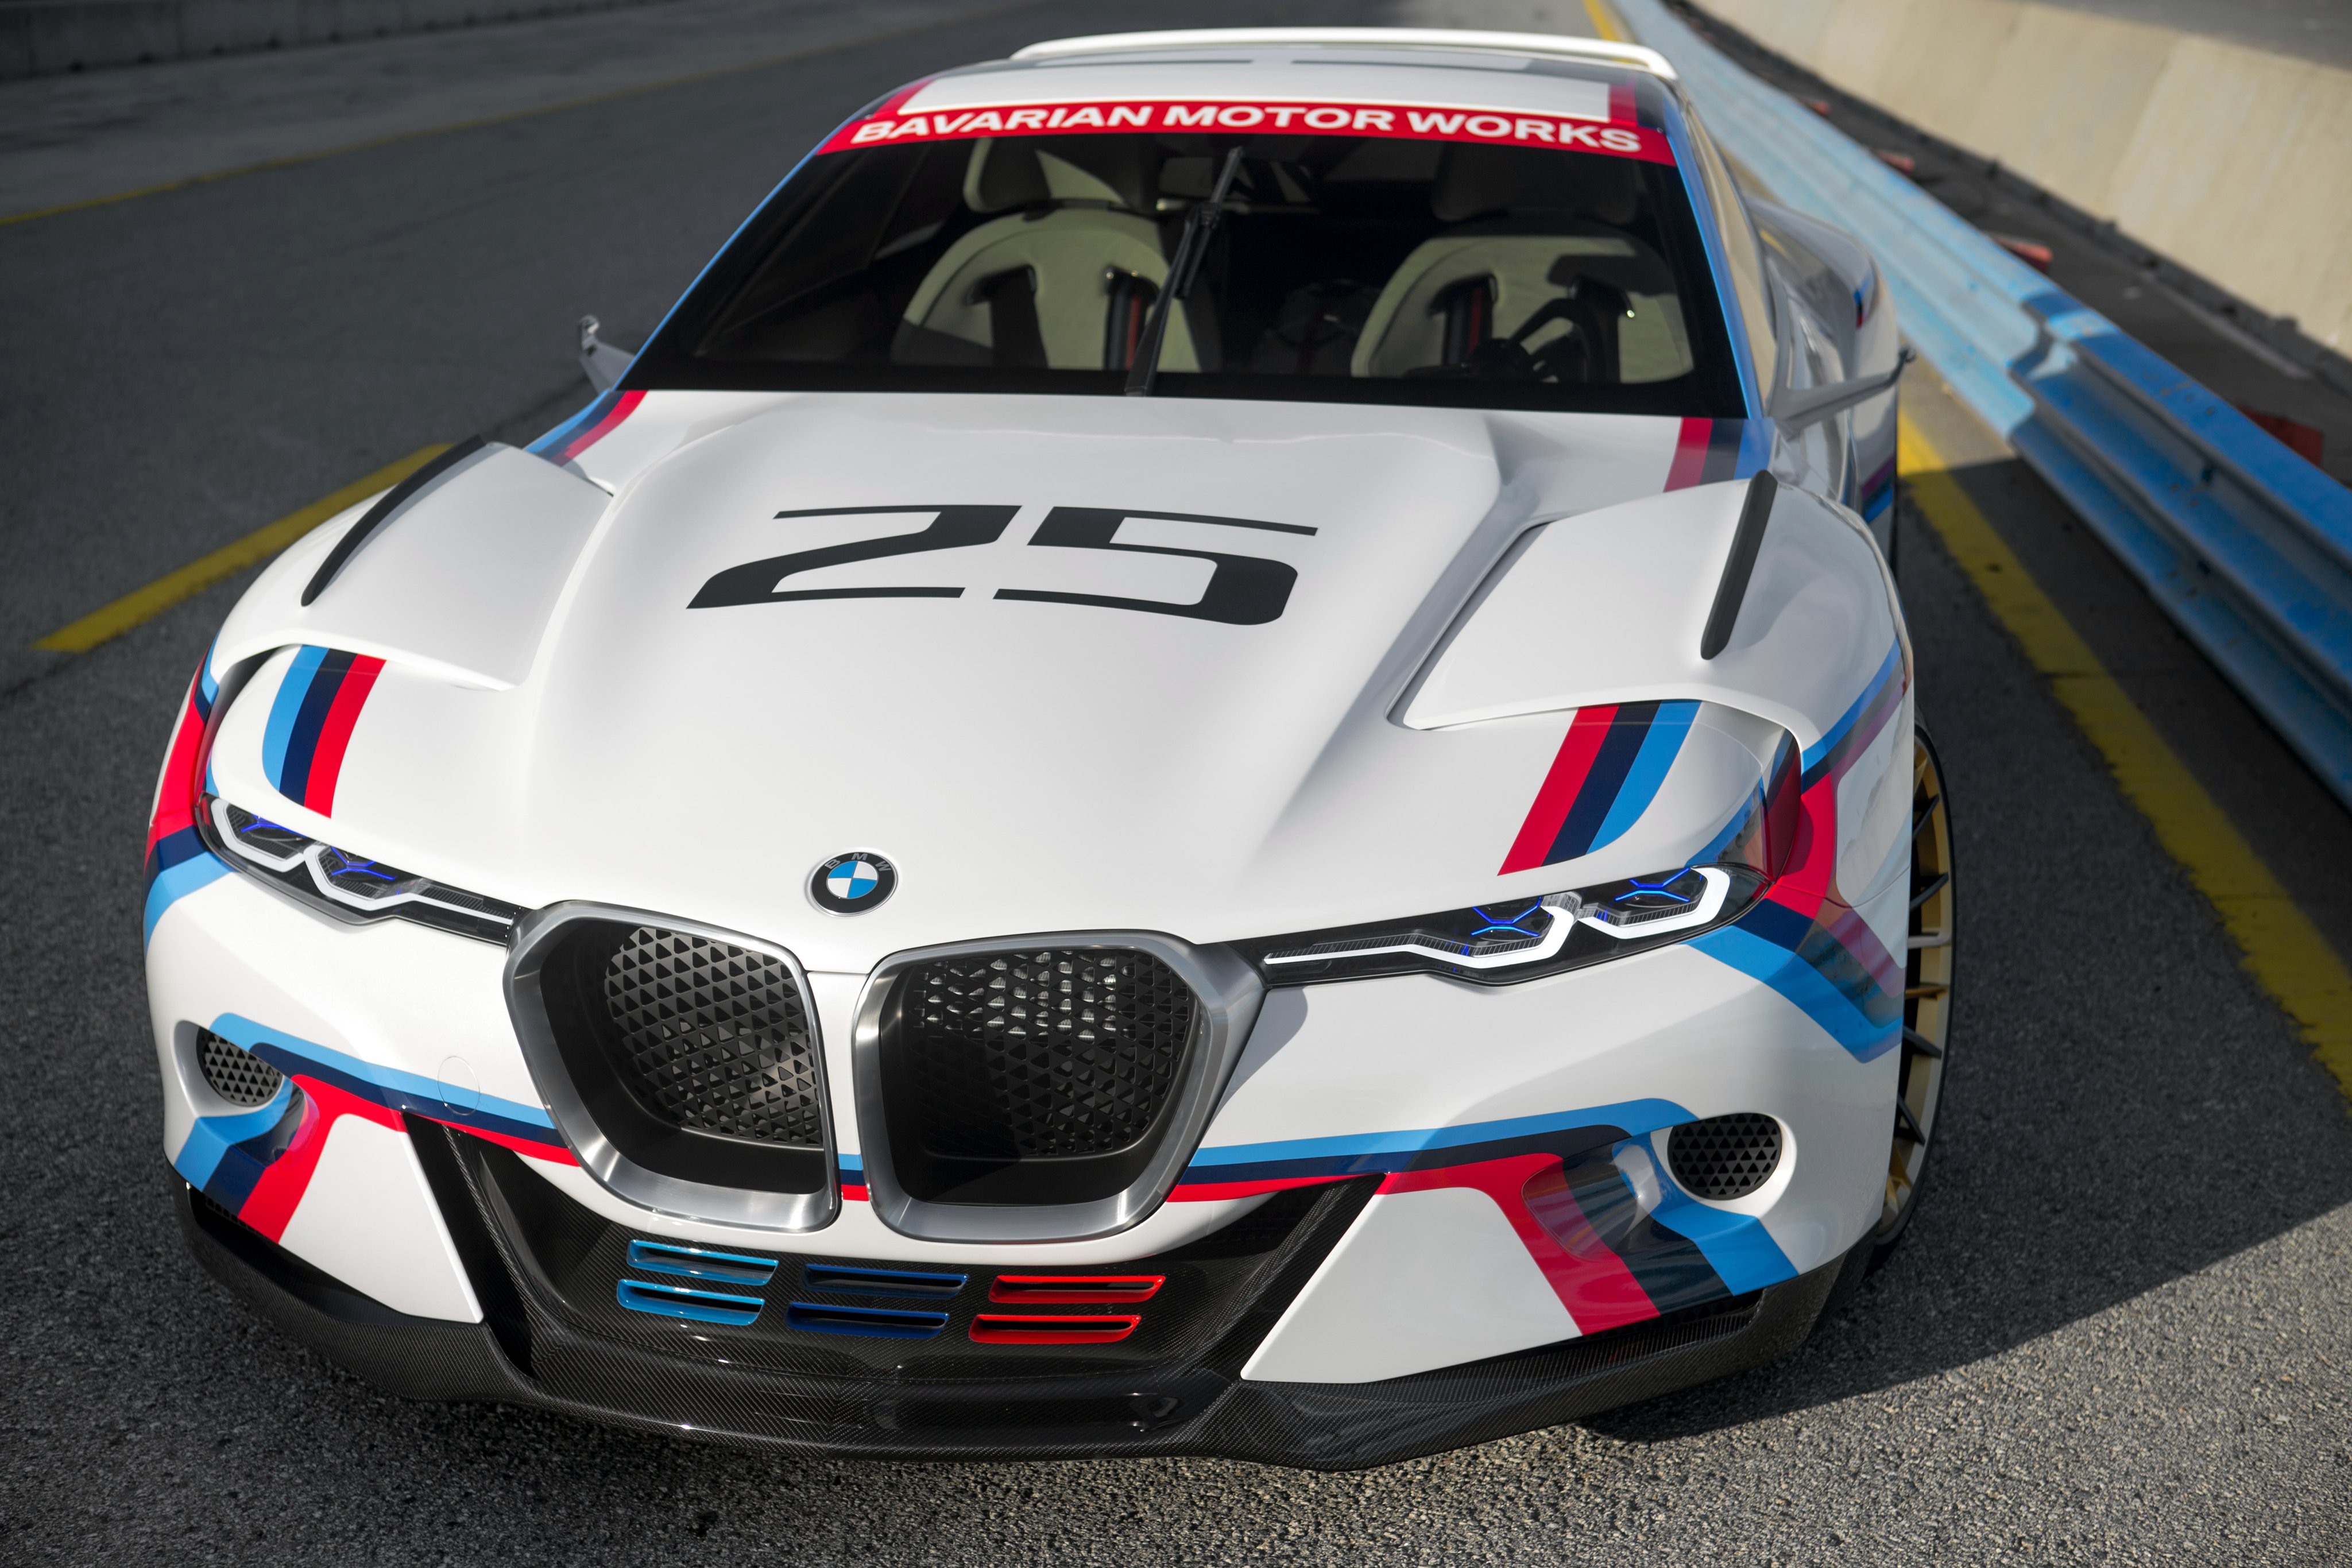 2015, Bmw, 3 0, Csl, Hommage, R, Tuning, Concept, Race, Racing Wallpaper